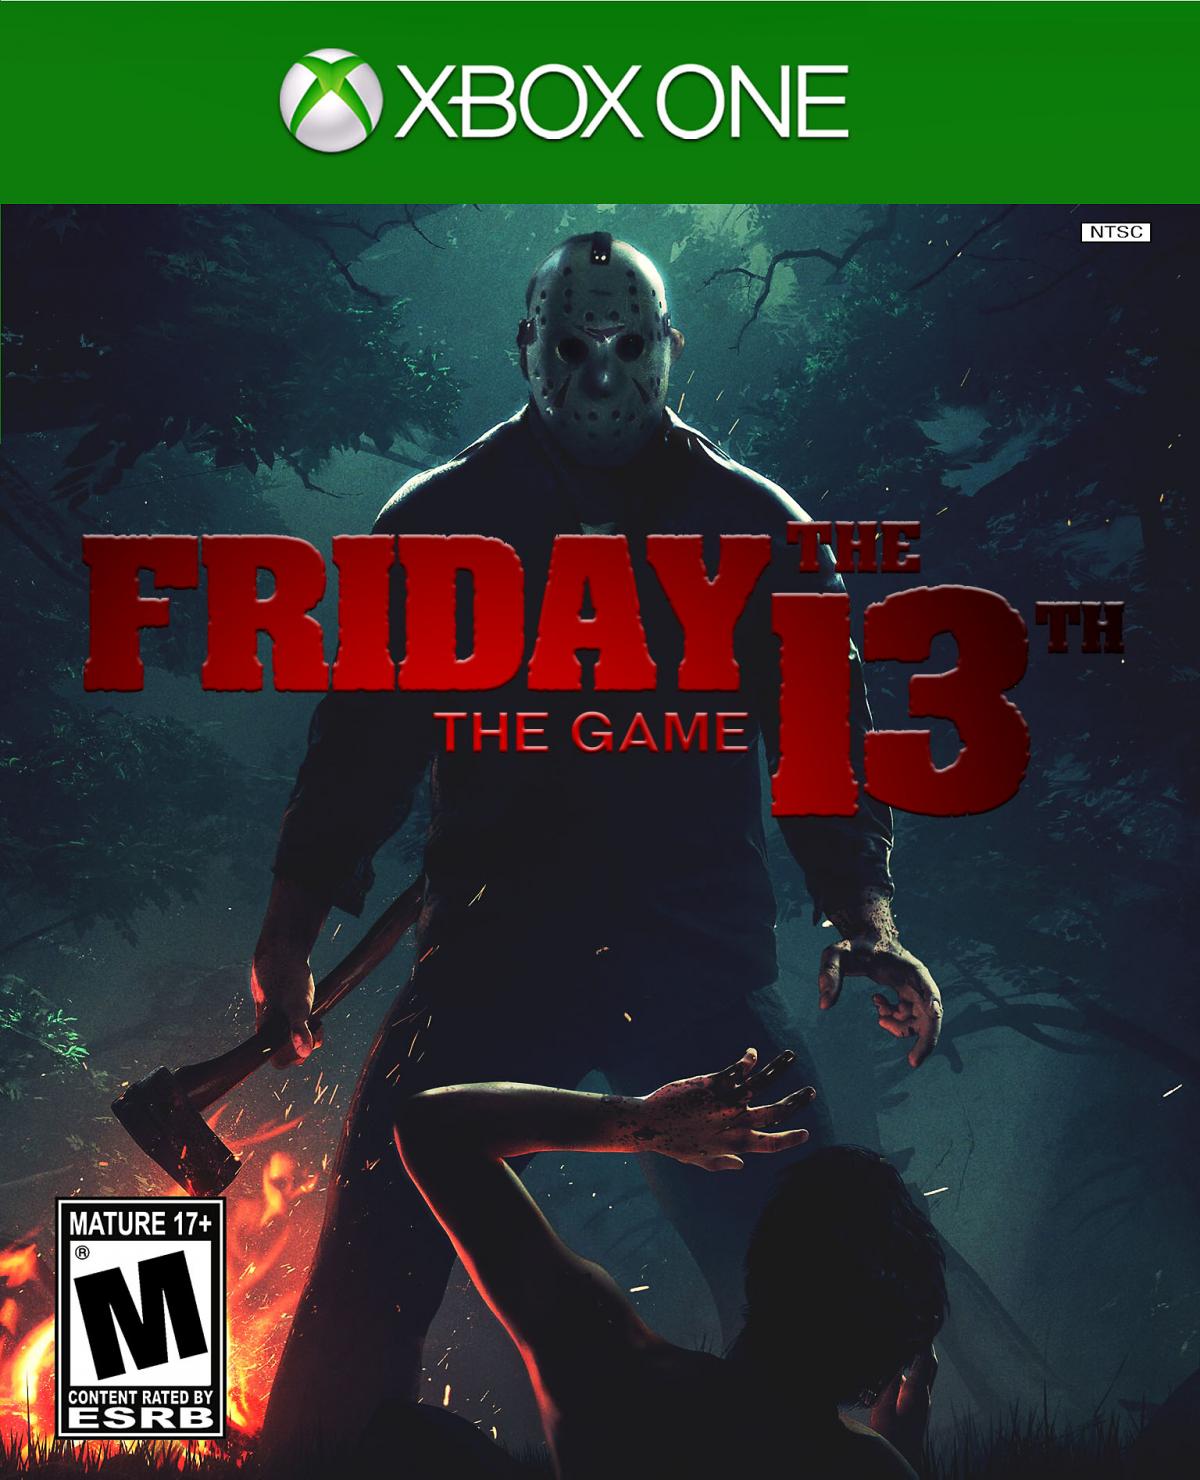 Friday The 13Th The Game Download Mac - Colaboratory